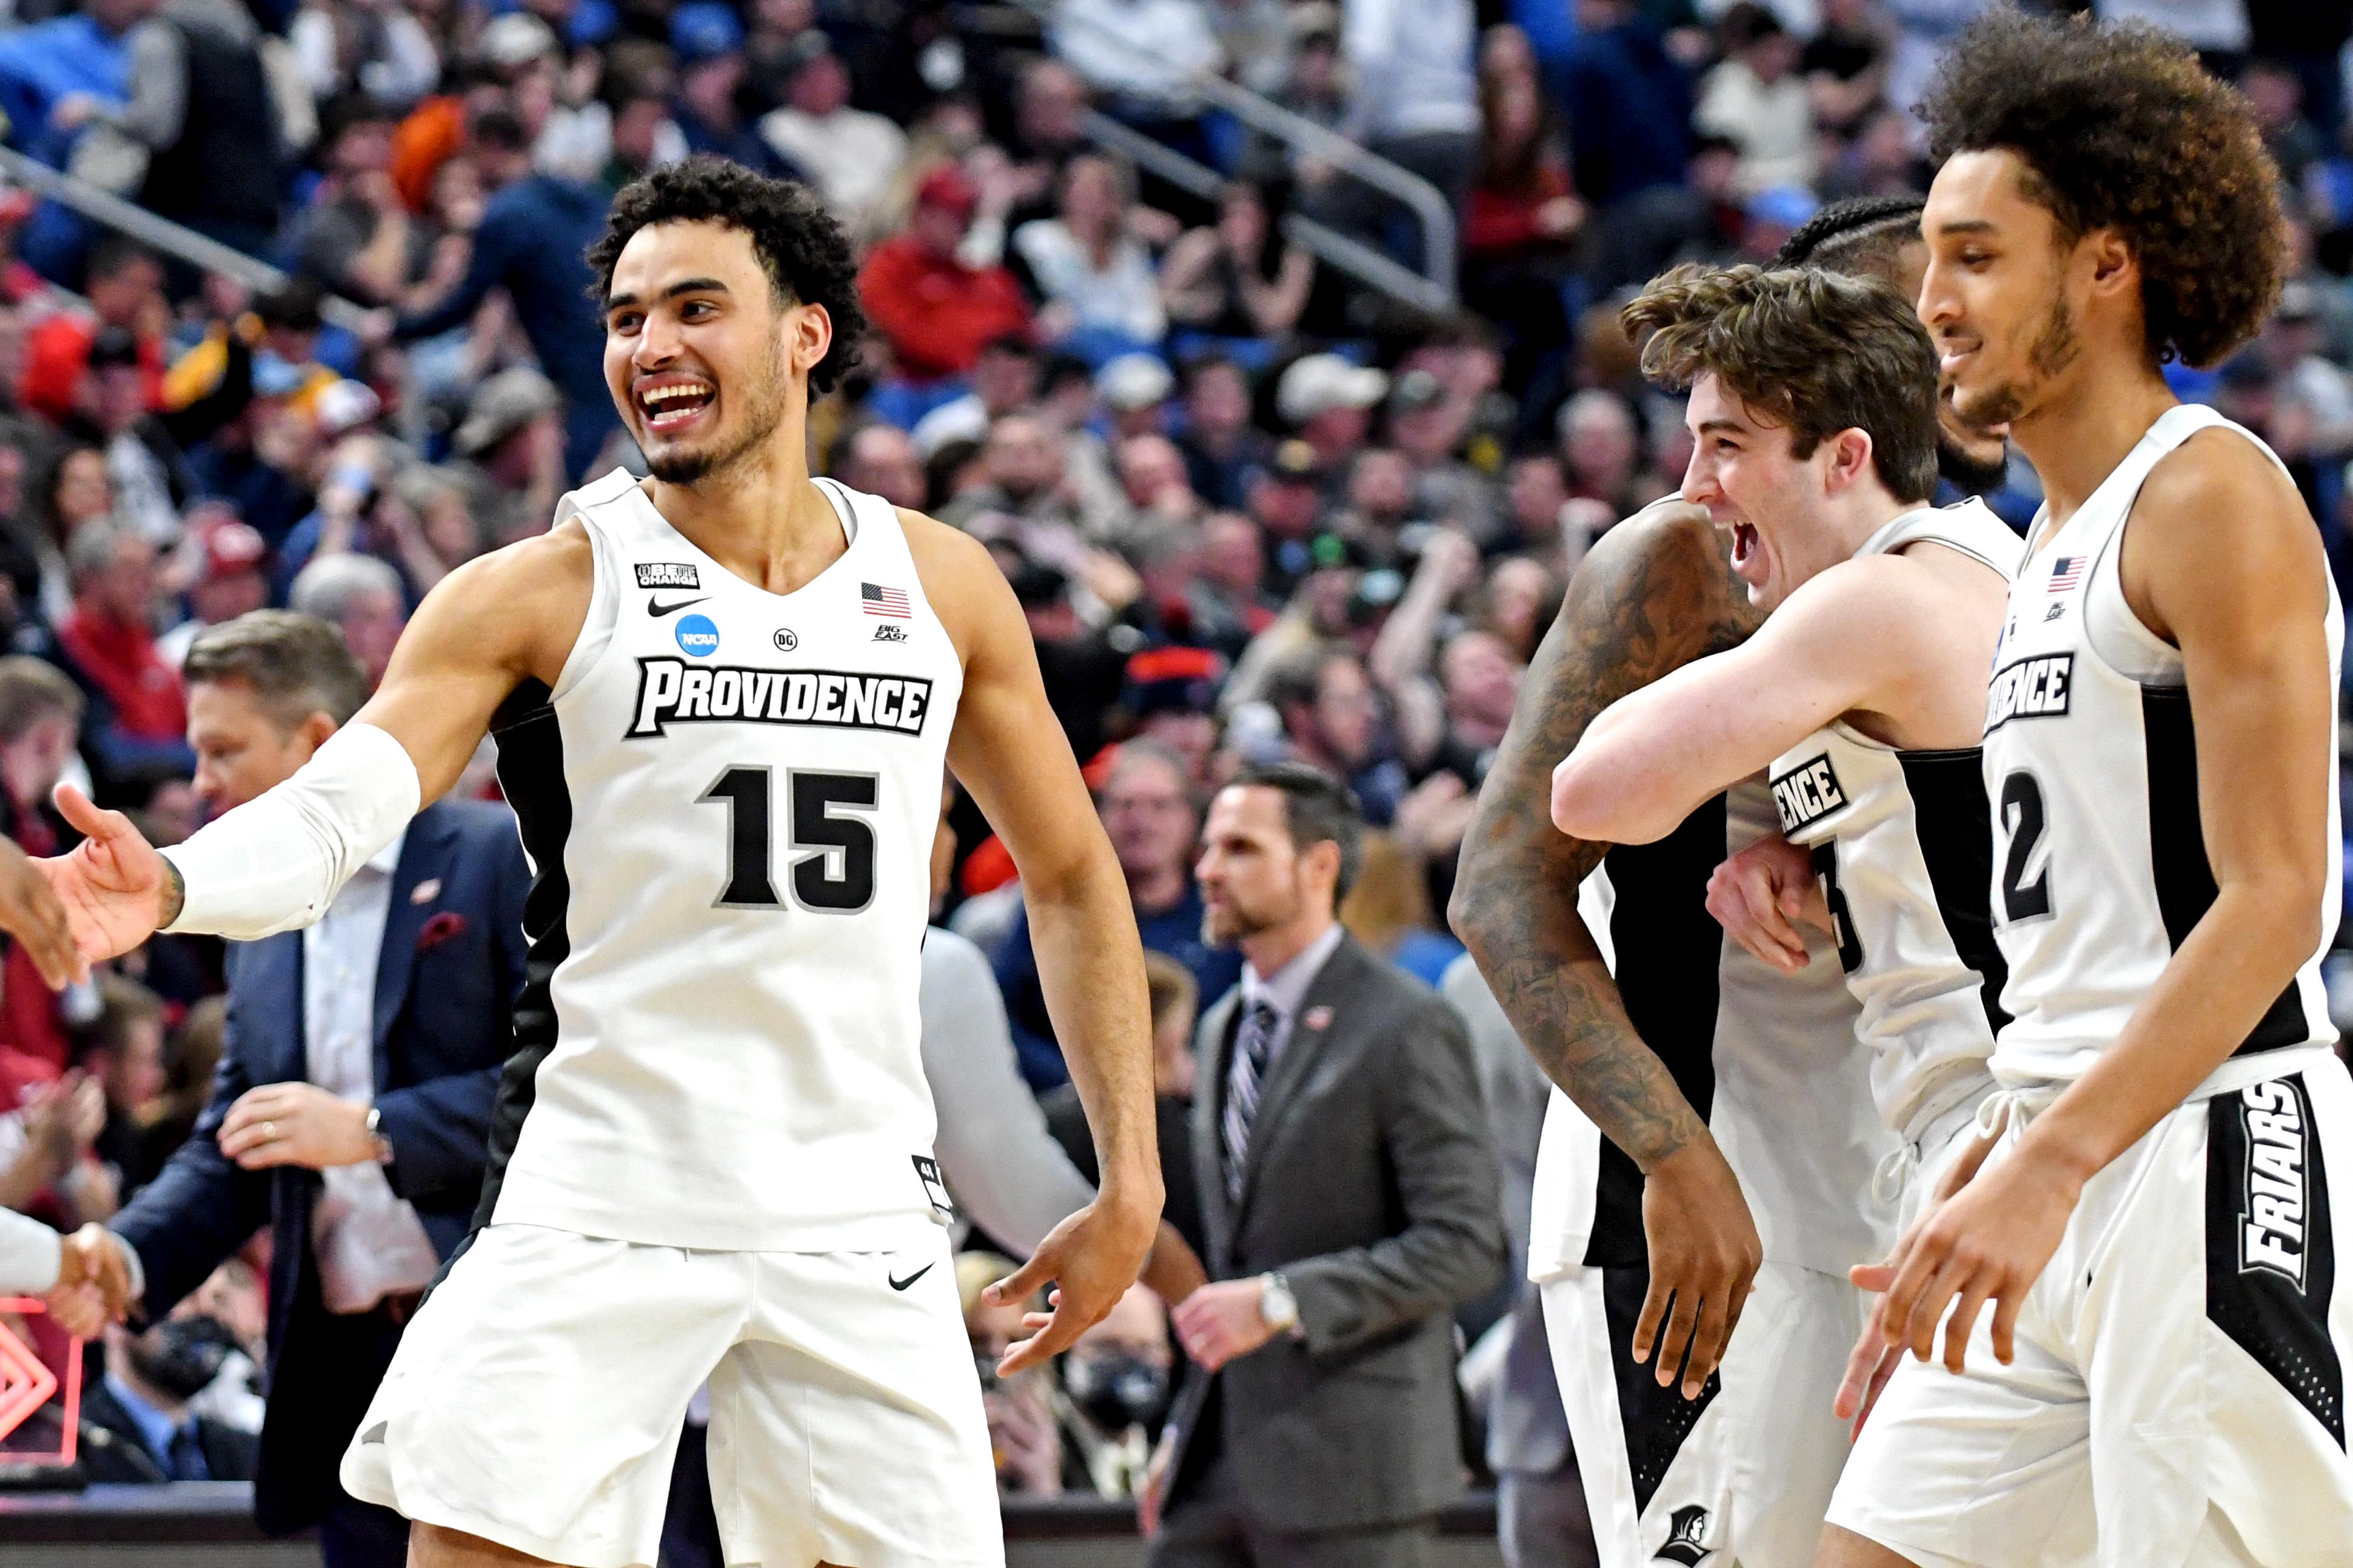 Providence NCAA Tournament History: National Championships, All-Time Record, Best March Madness Results & More